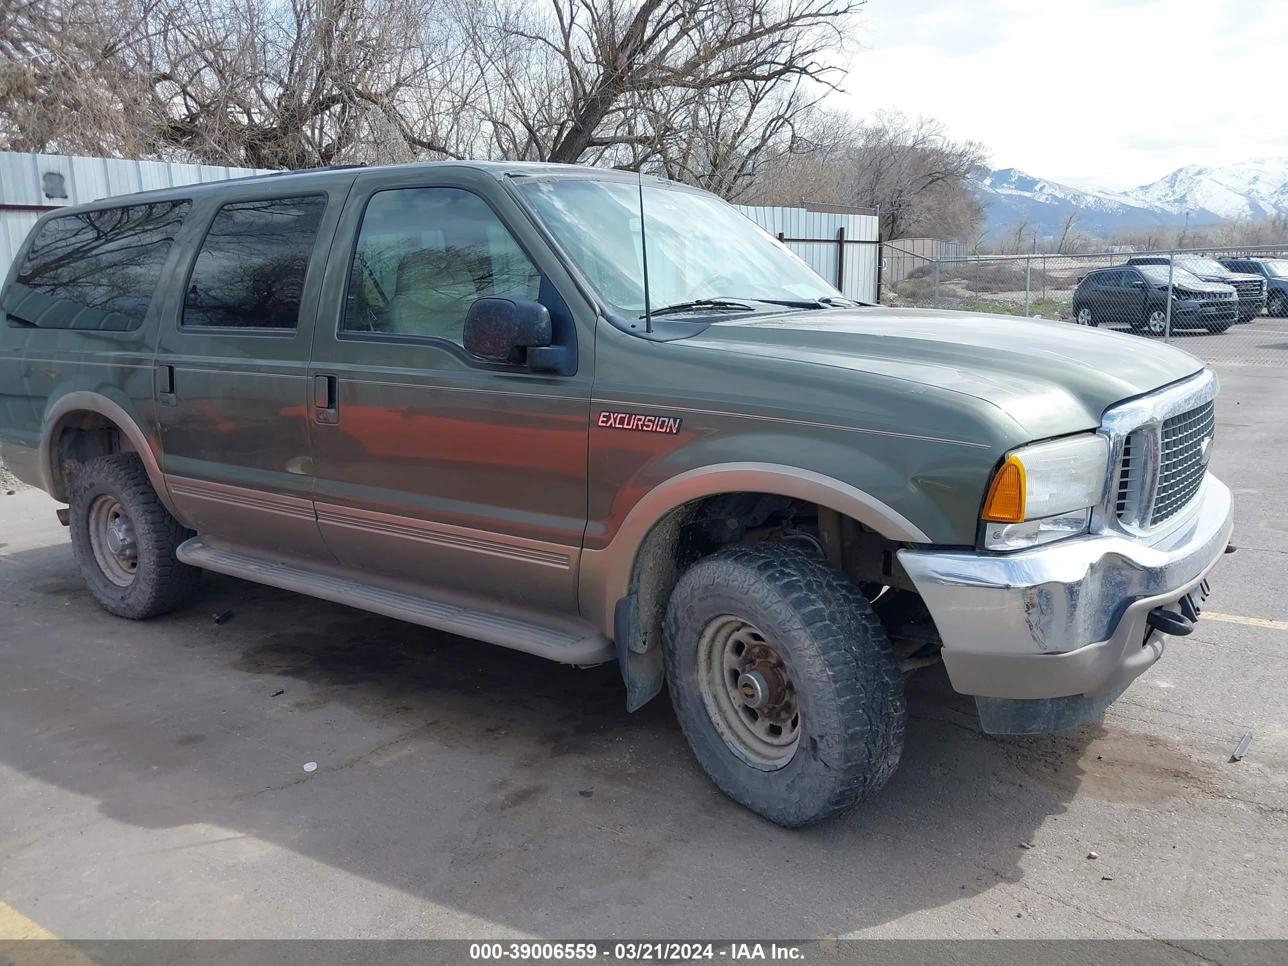 vin: 1FMNU43S8YEA63775 1FMNU43S8YEA63775 2000 ford excursion 6800 for Sale in 84401, 1800 South 1100 West, Ogden, Utah, USA